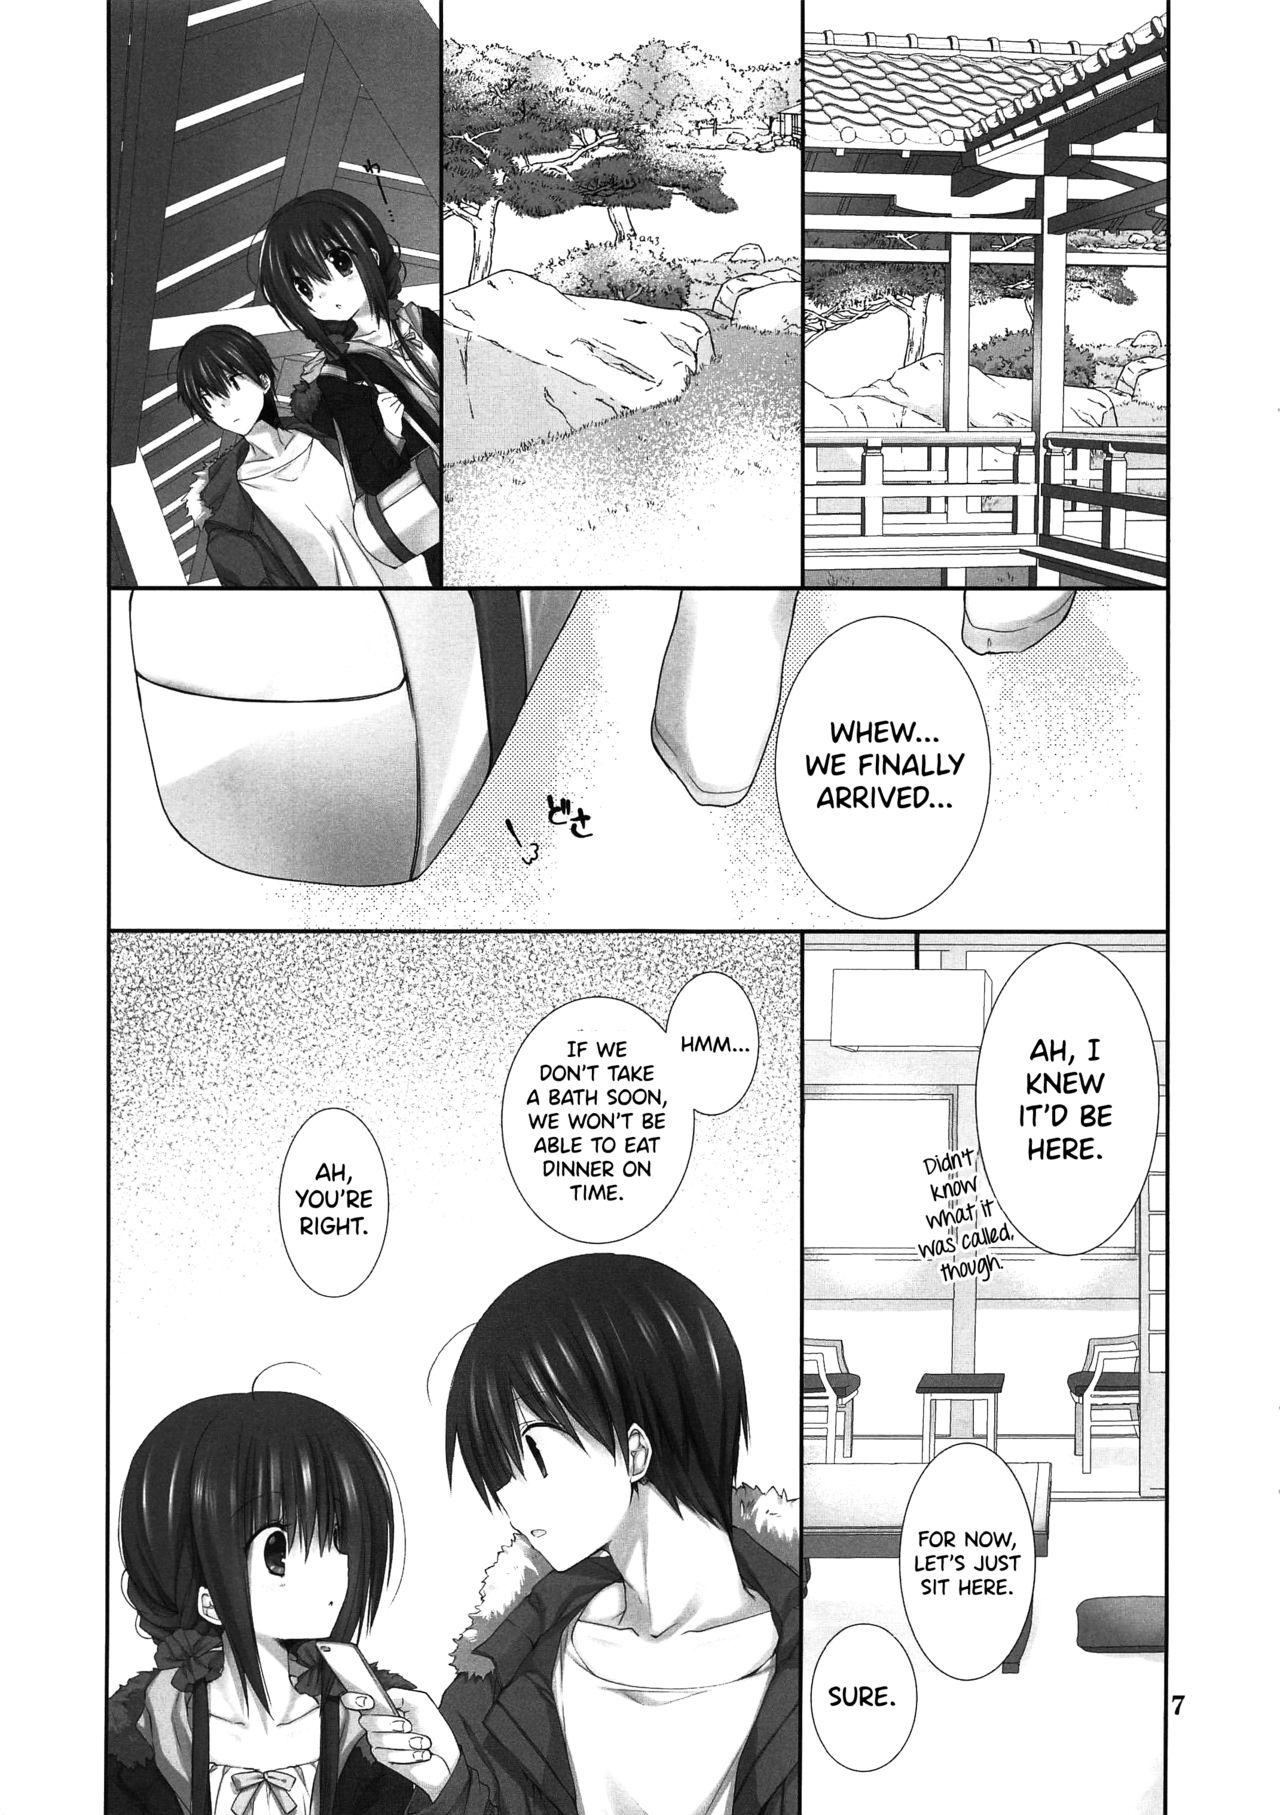 Facefuck Imouto no Otetsudai 9 | Little Sister Helper 9 - Original Sissy - Page 6